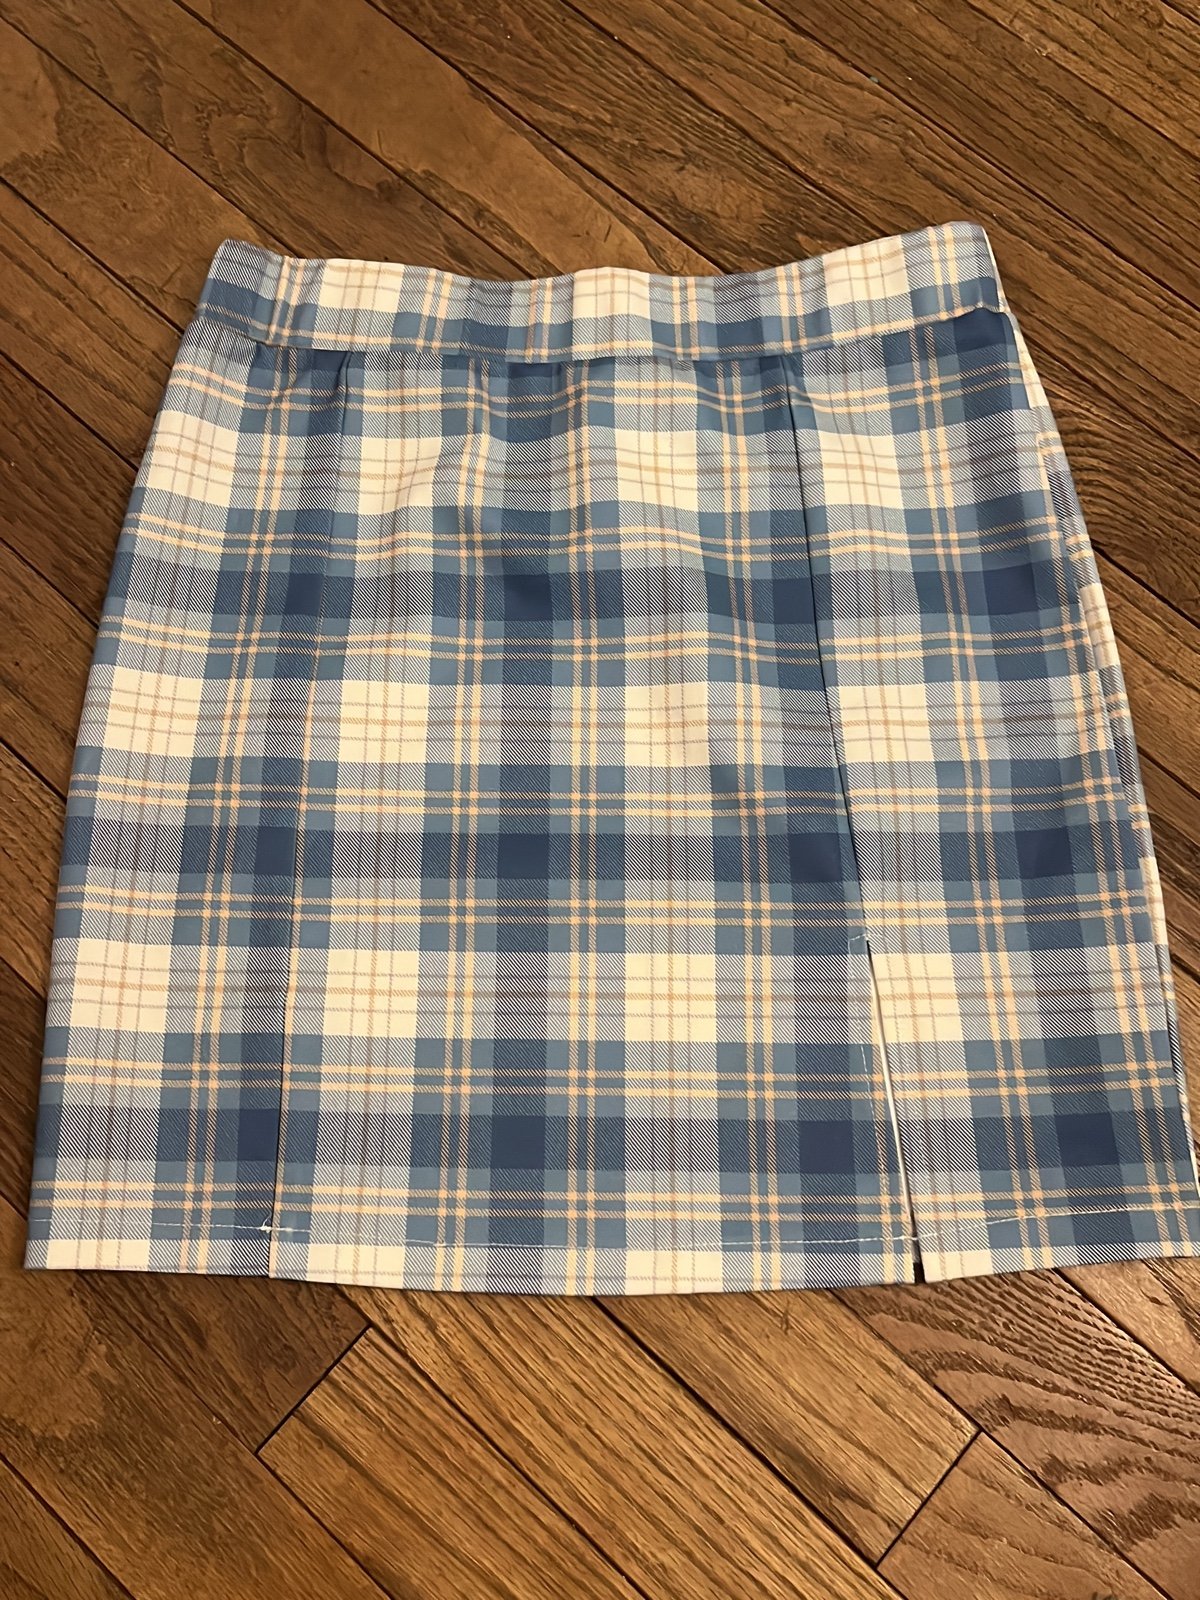 large discount Plaid skirt ghFdJVyER Outlet Store